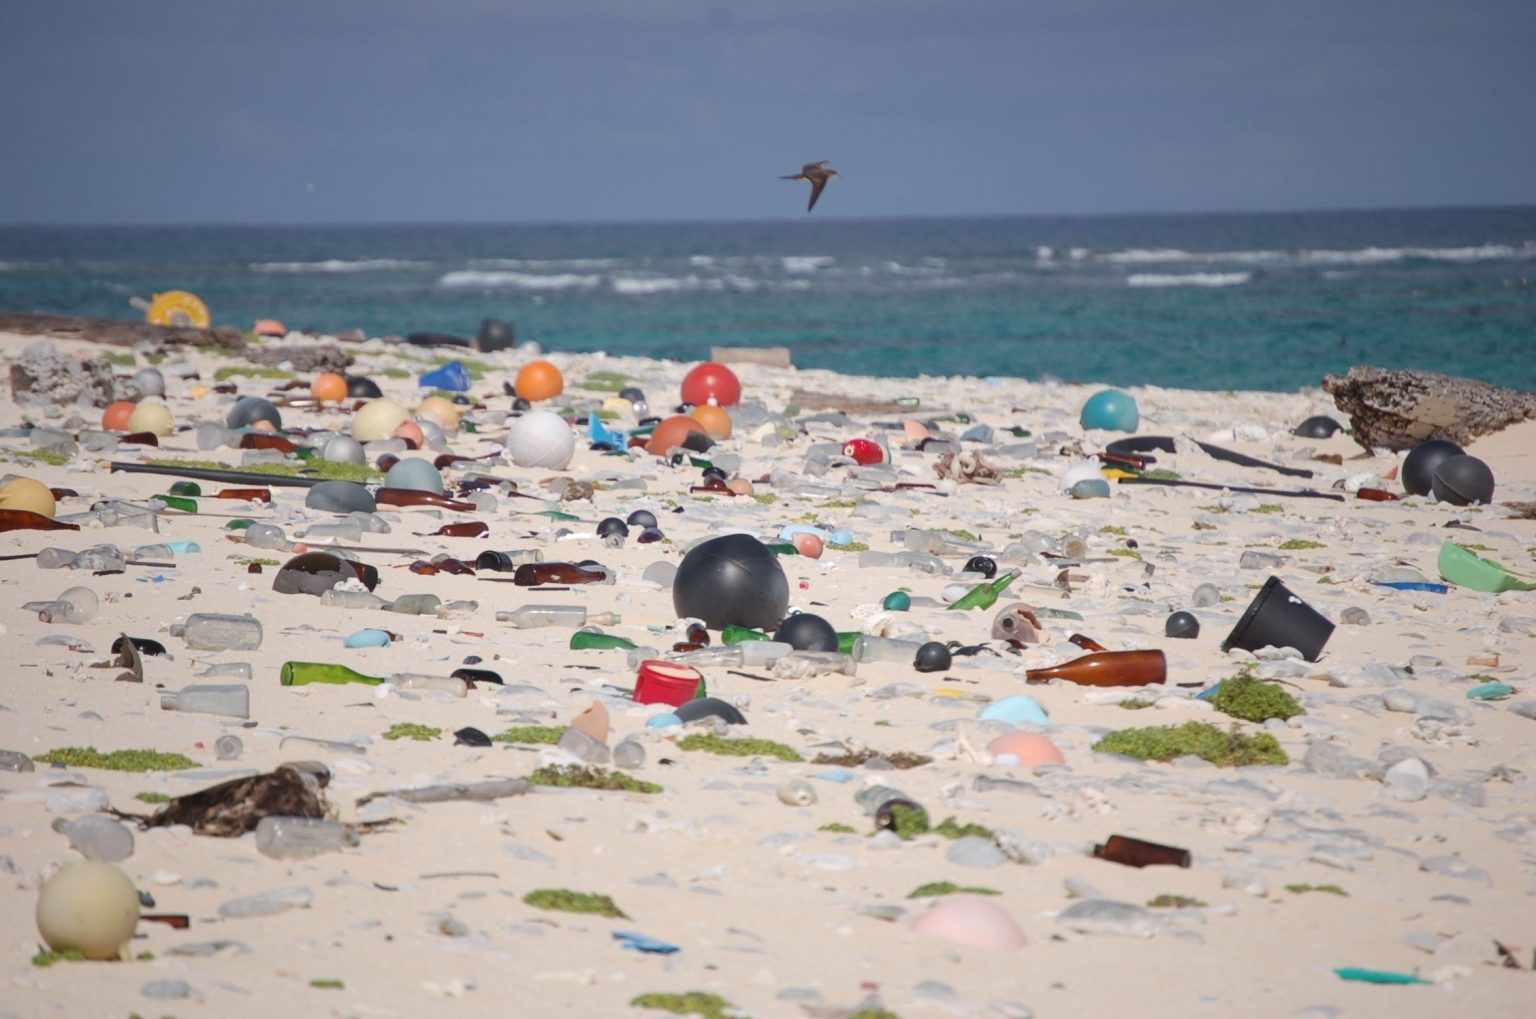 Newswise: Designing plastic to break down in the ocean is possible, but is it practical?